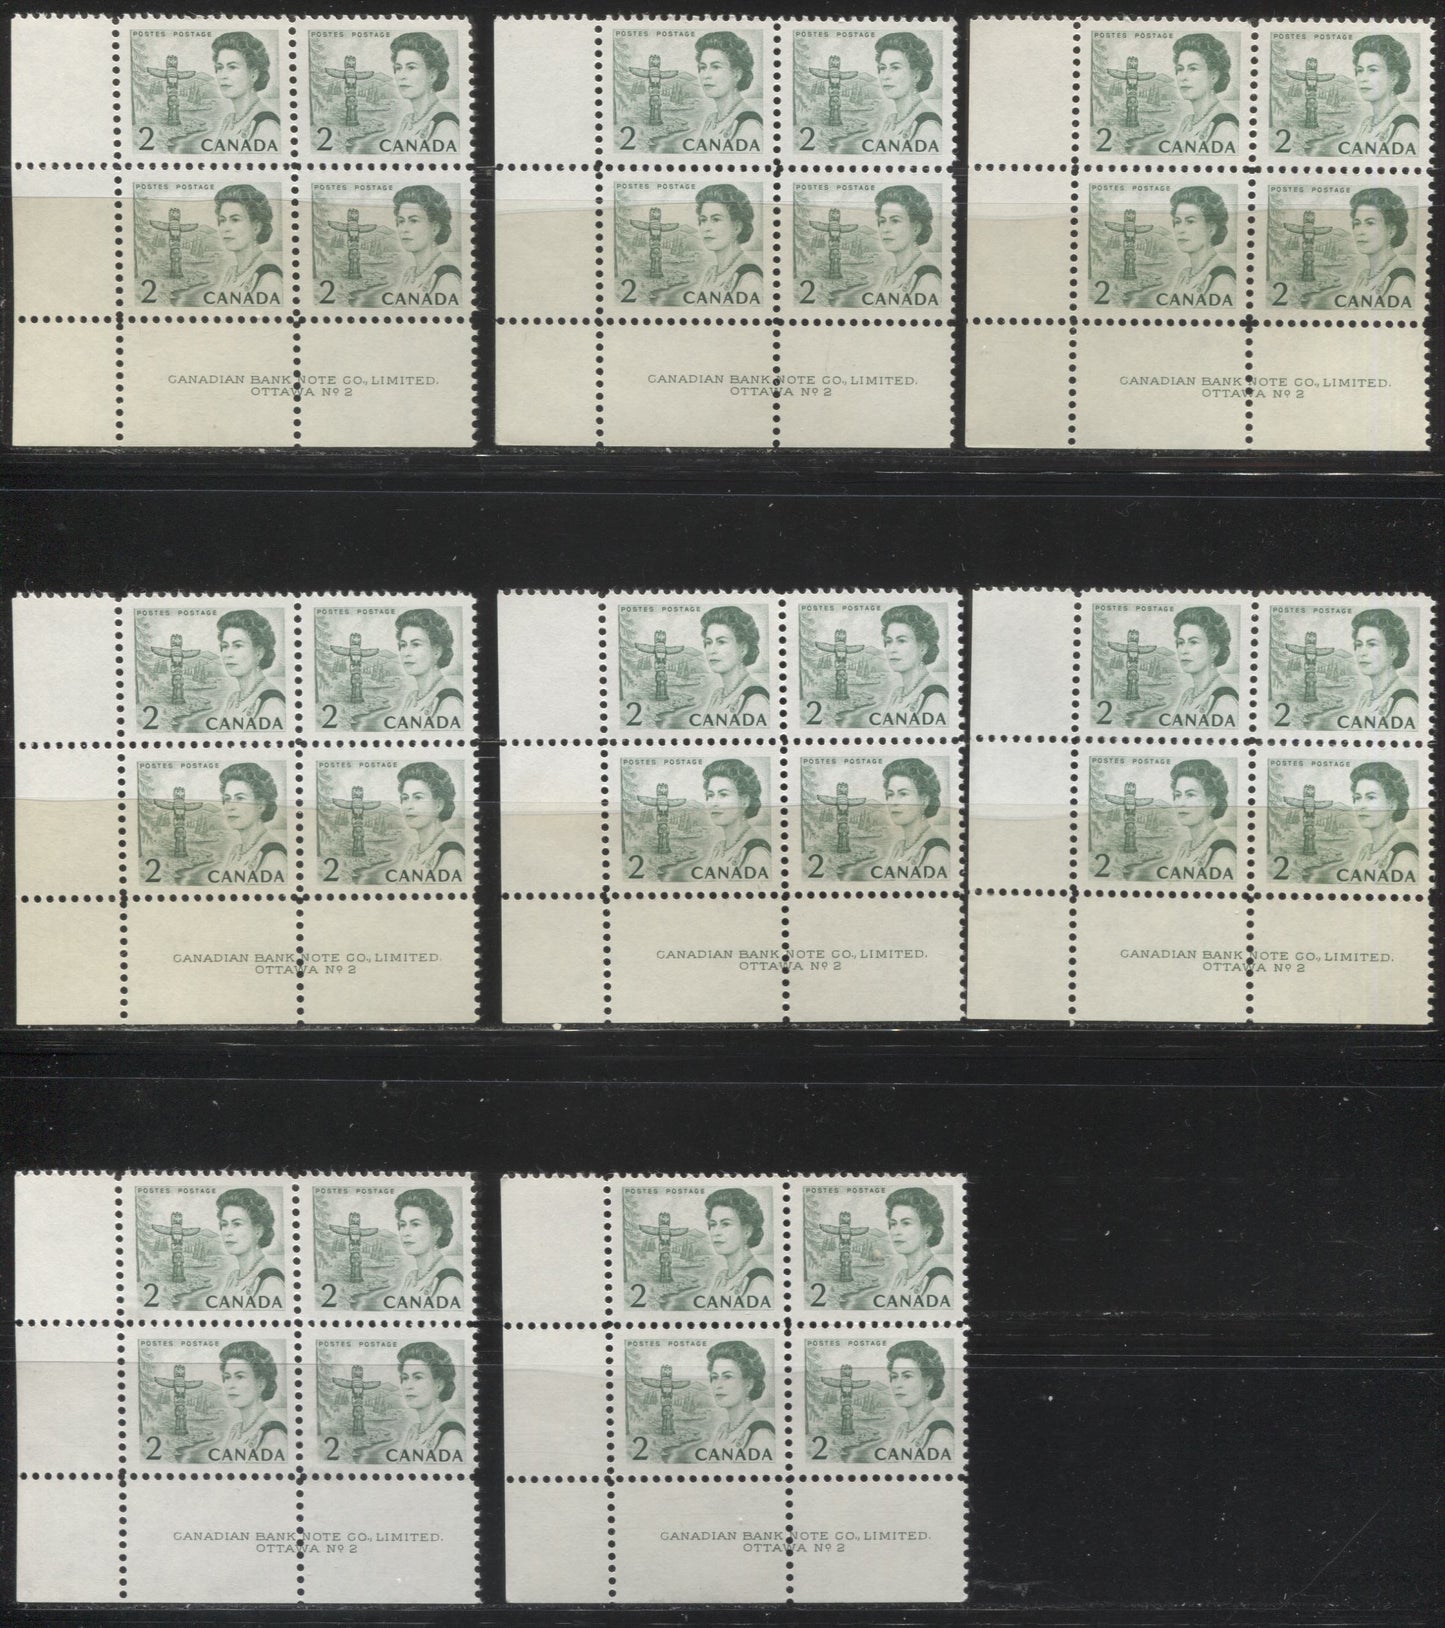 Lot #160 Canada #455, 455iv 2c Green & Bright Green, Pacific Coast Totem Pole, 1967-1973 Centennial Issue, A Specialized Lot of Plate 2 LL Blocks on DF and NF Papers